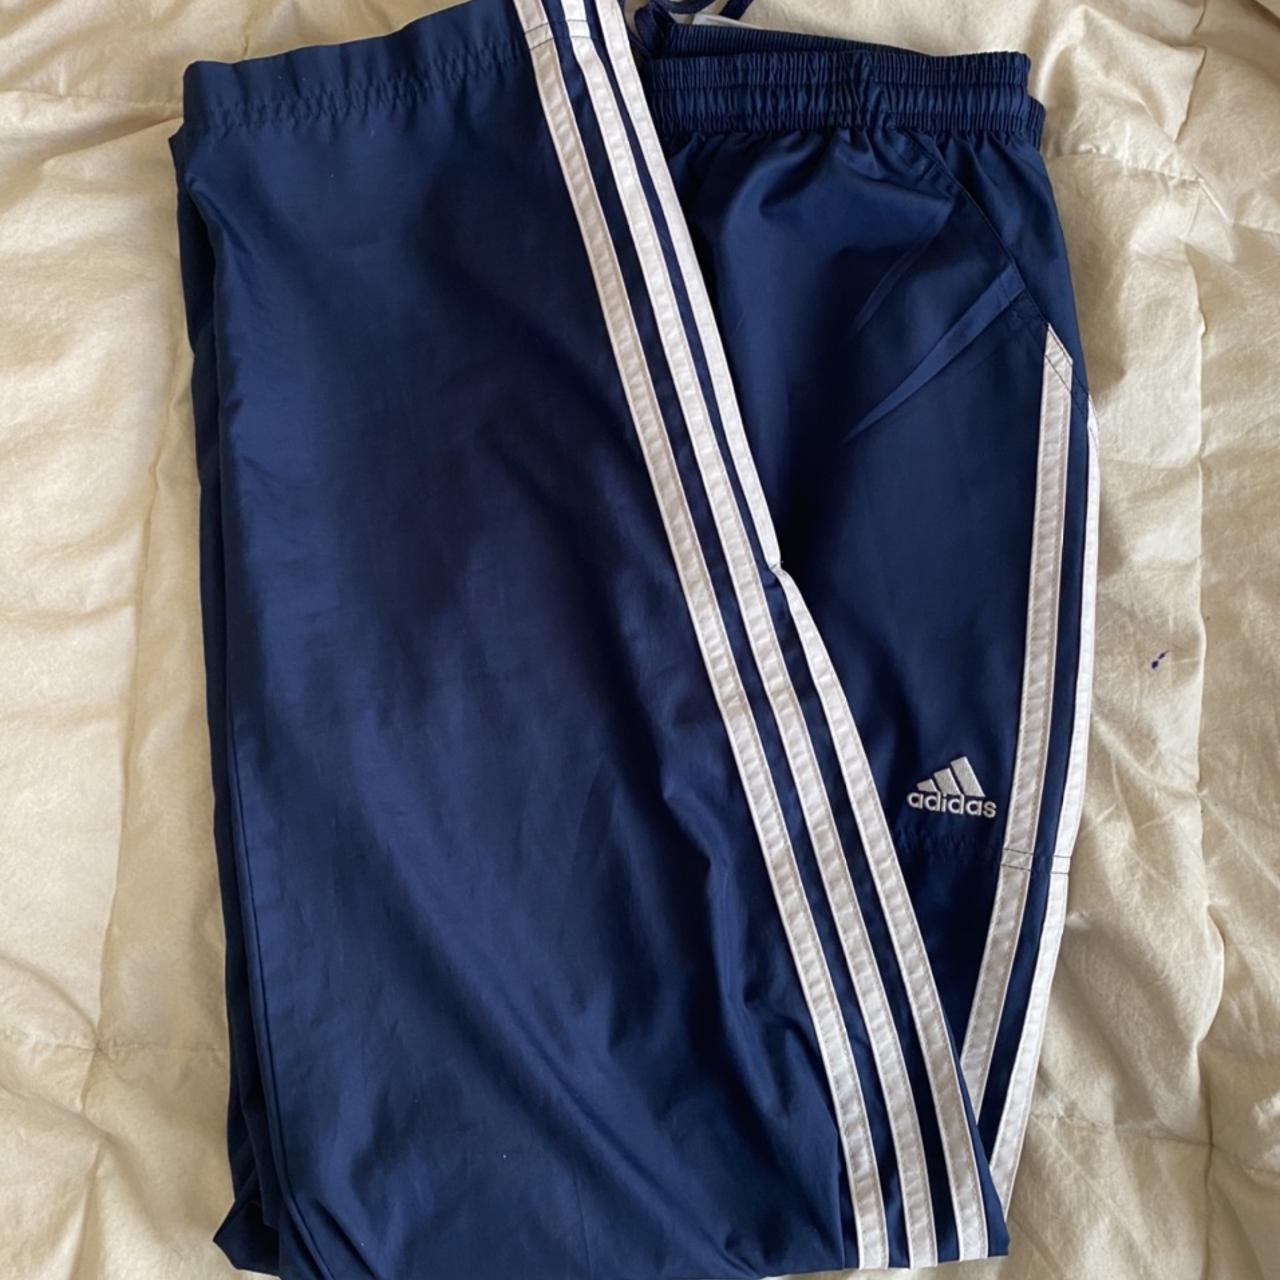 Authentic Adidas Track Bottoms - Adult Small Like New - Depop